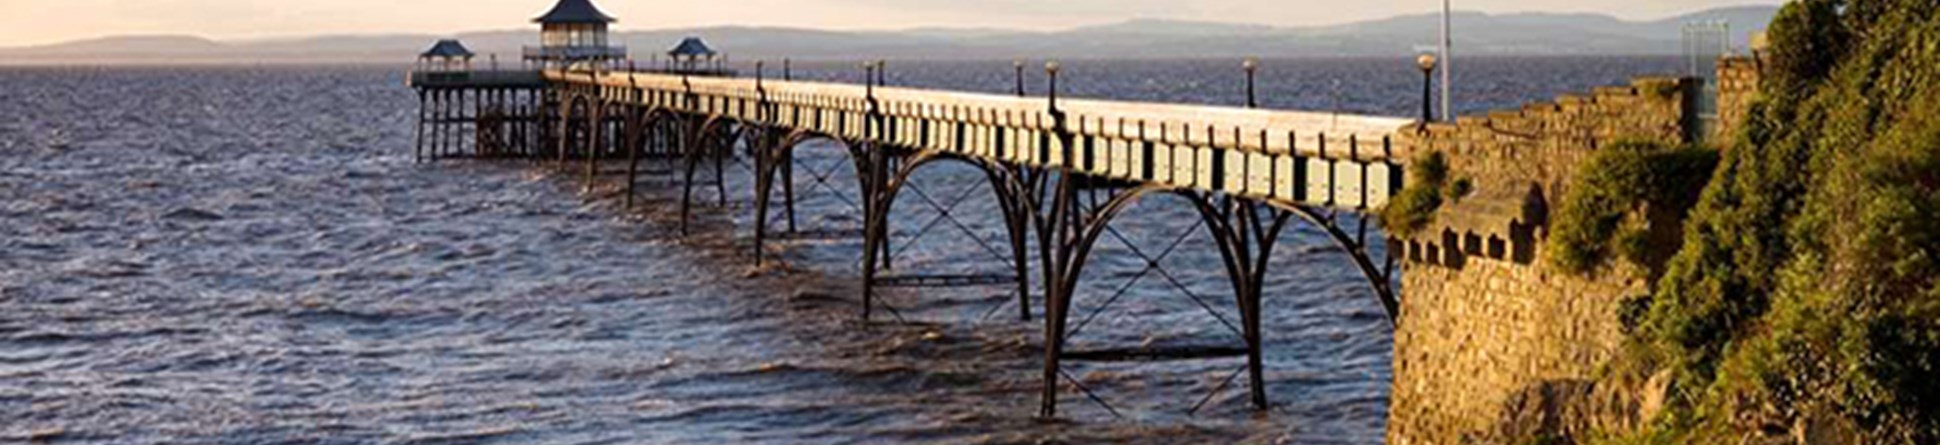 Image of Clevedon Pier, which was described by the poet Sir John Betjeman as "the most beautiful pier in England"